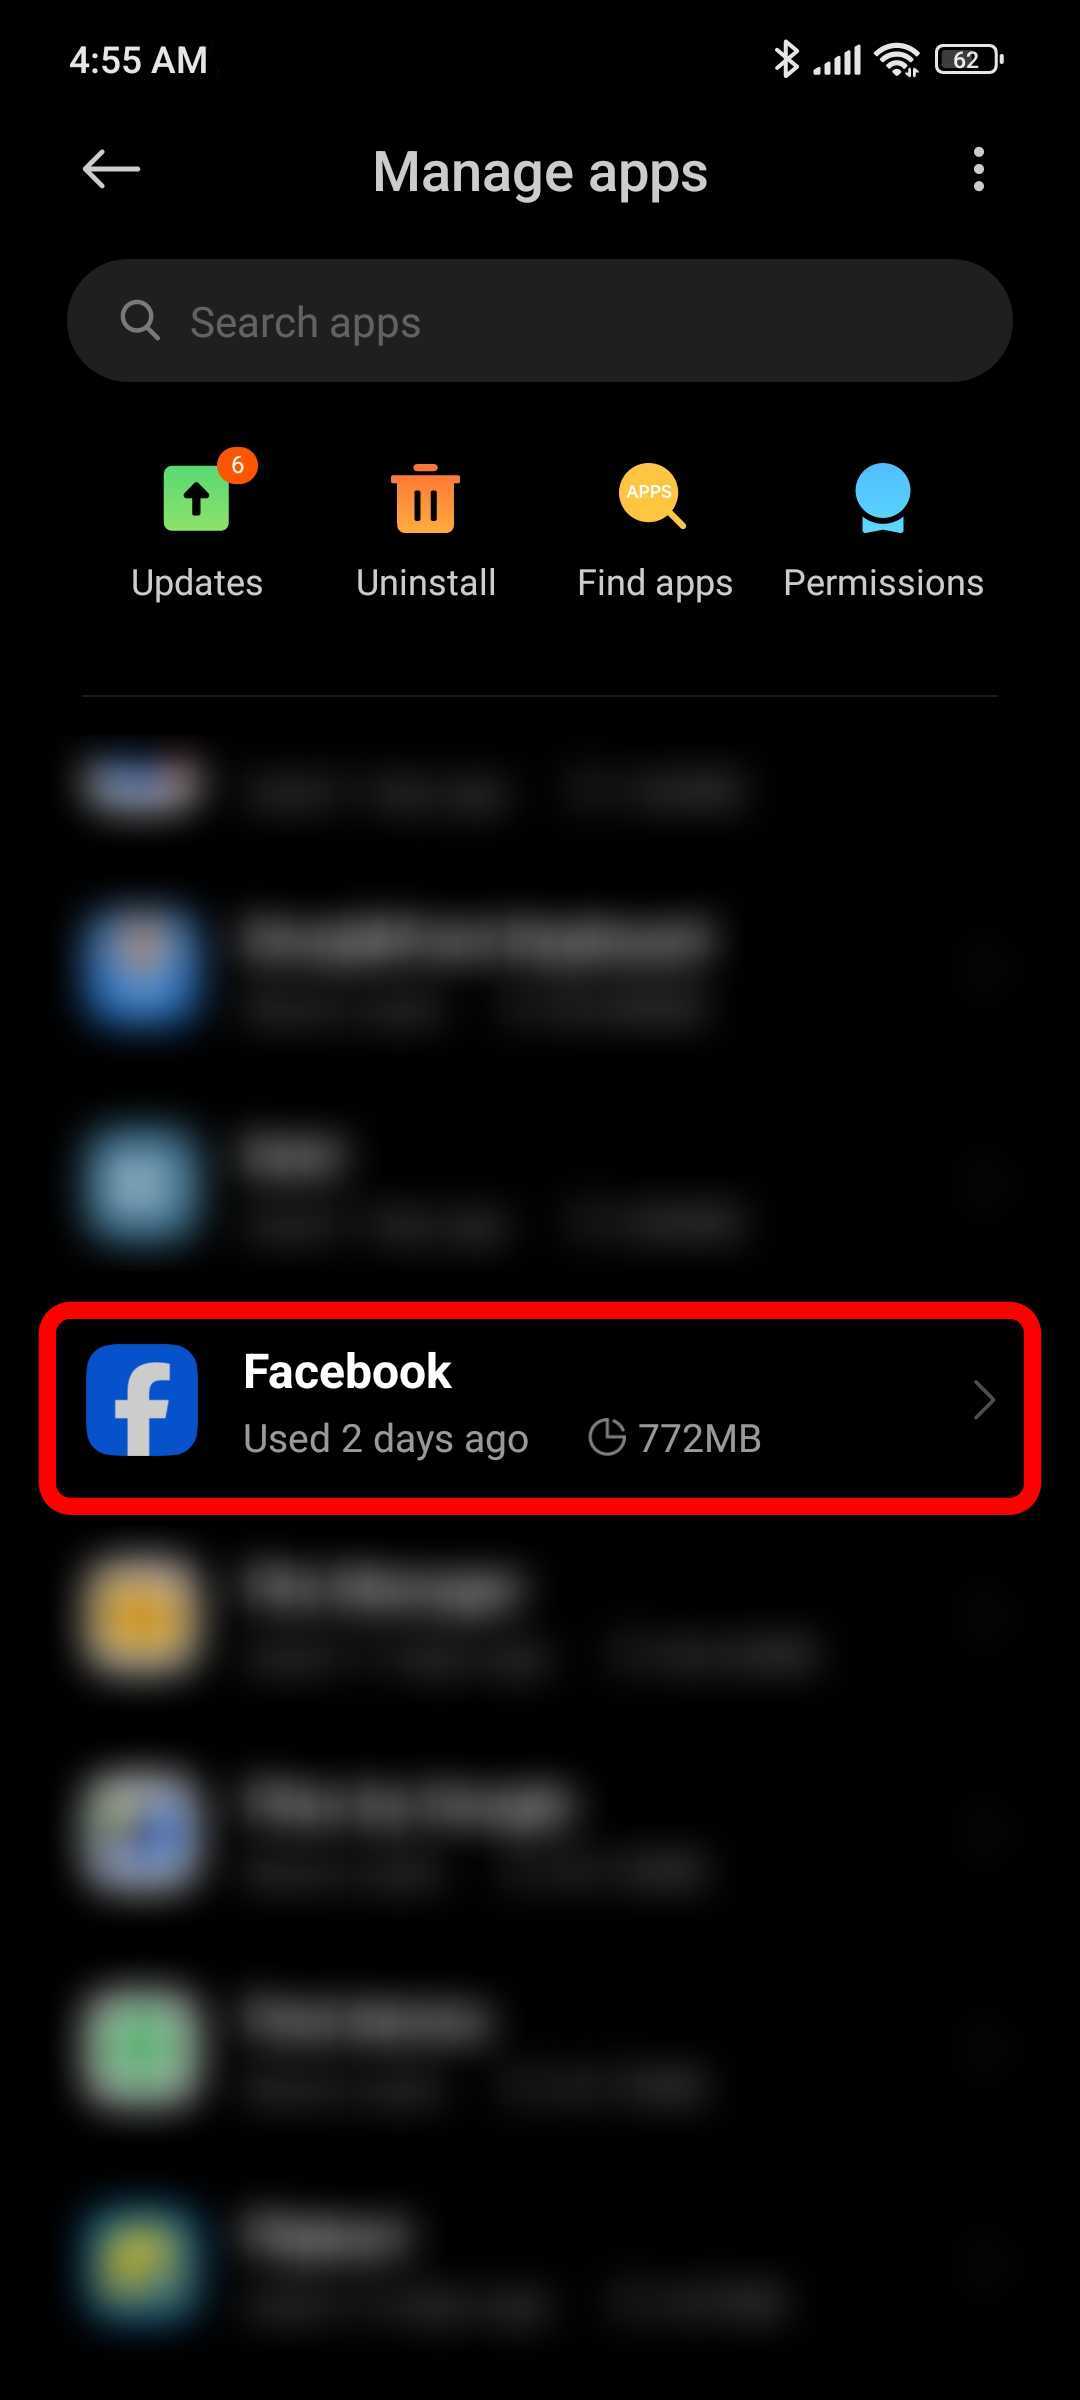 Go to Facebook app from installed list of apps